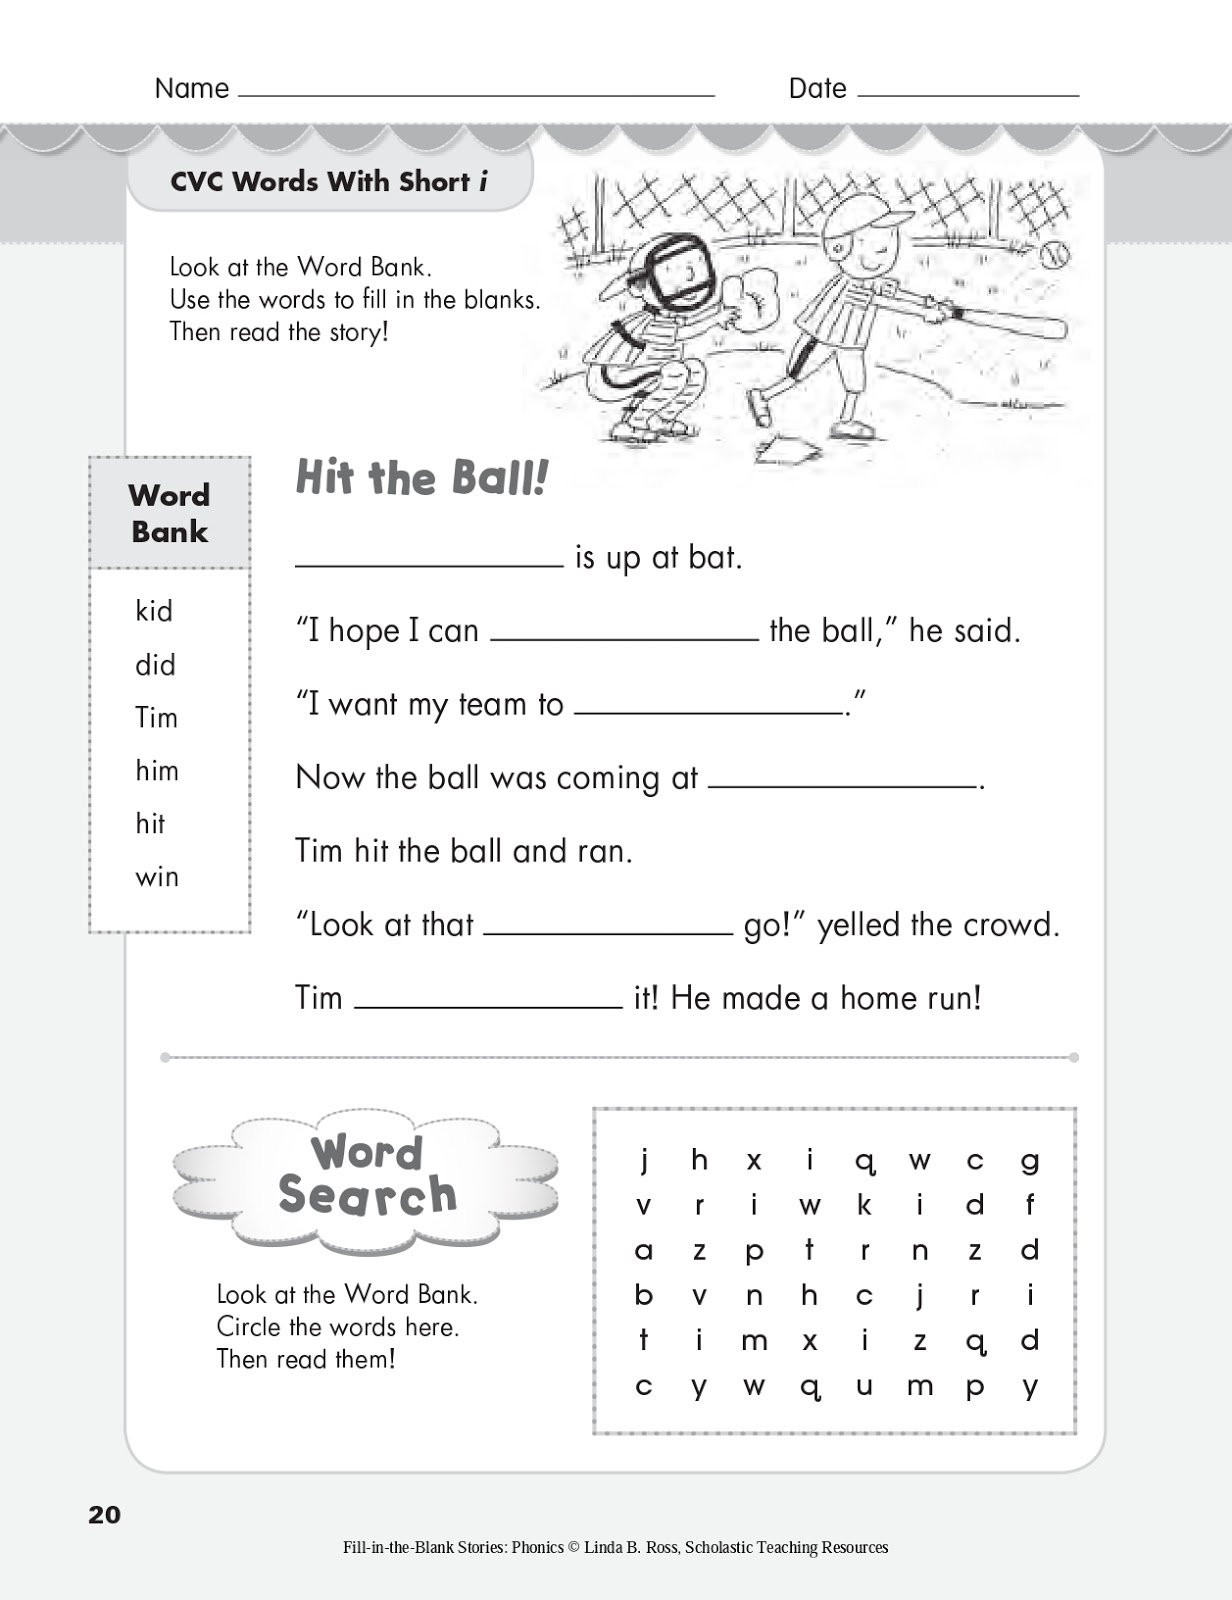 Fill-in-the-Blank Stories: PHONICS